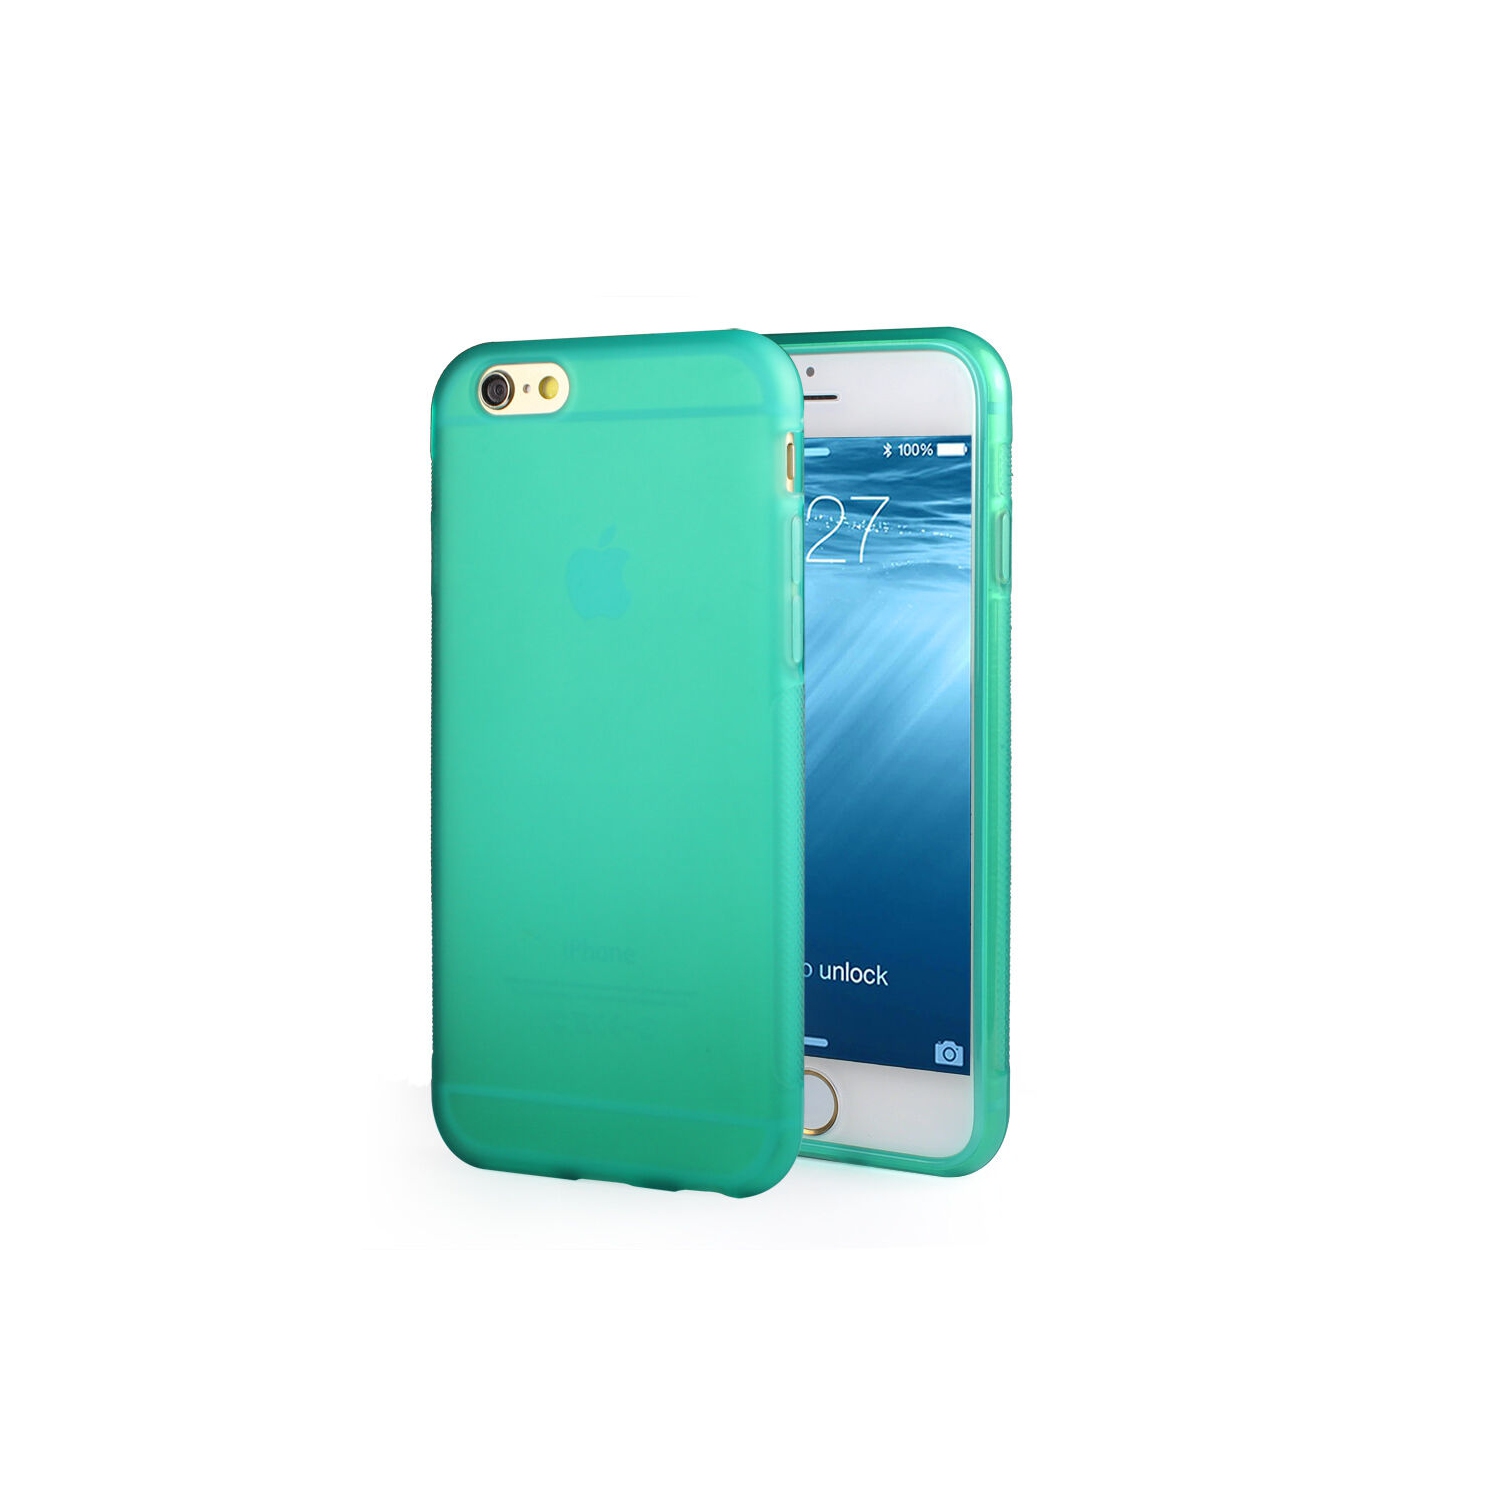 Ultra Thin Green Matte Back Soft TPU Case Skin Cover For iPhone 6 4.7" 4.7inch